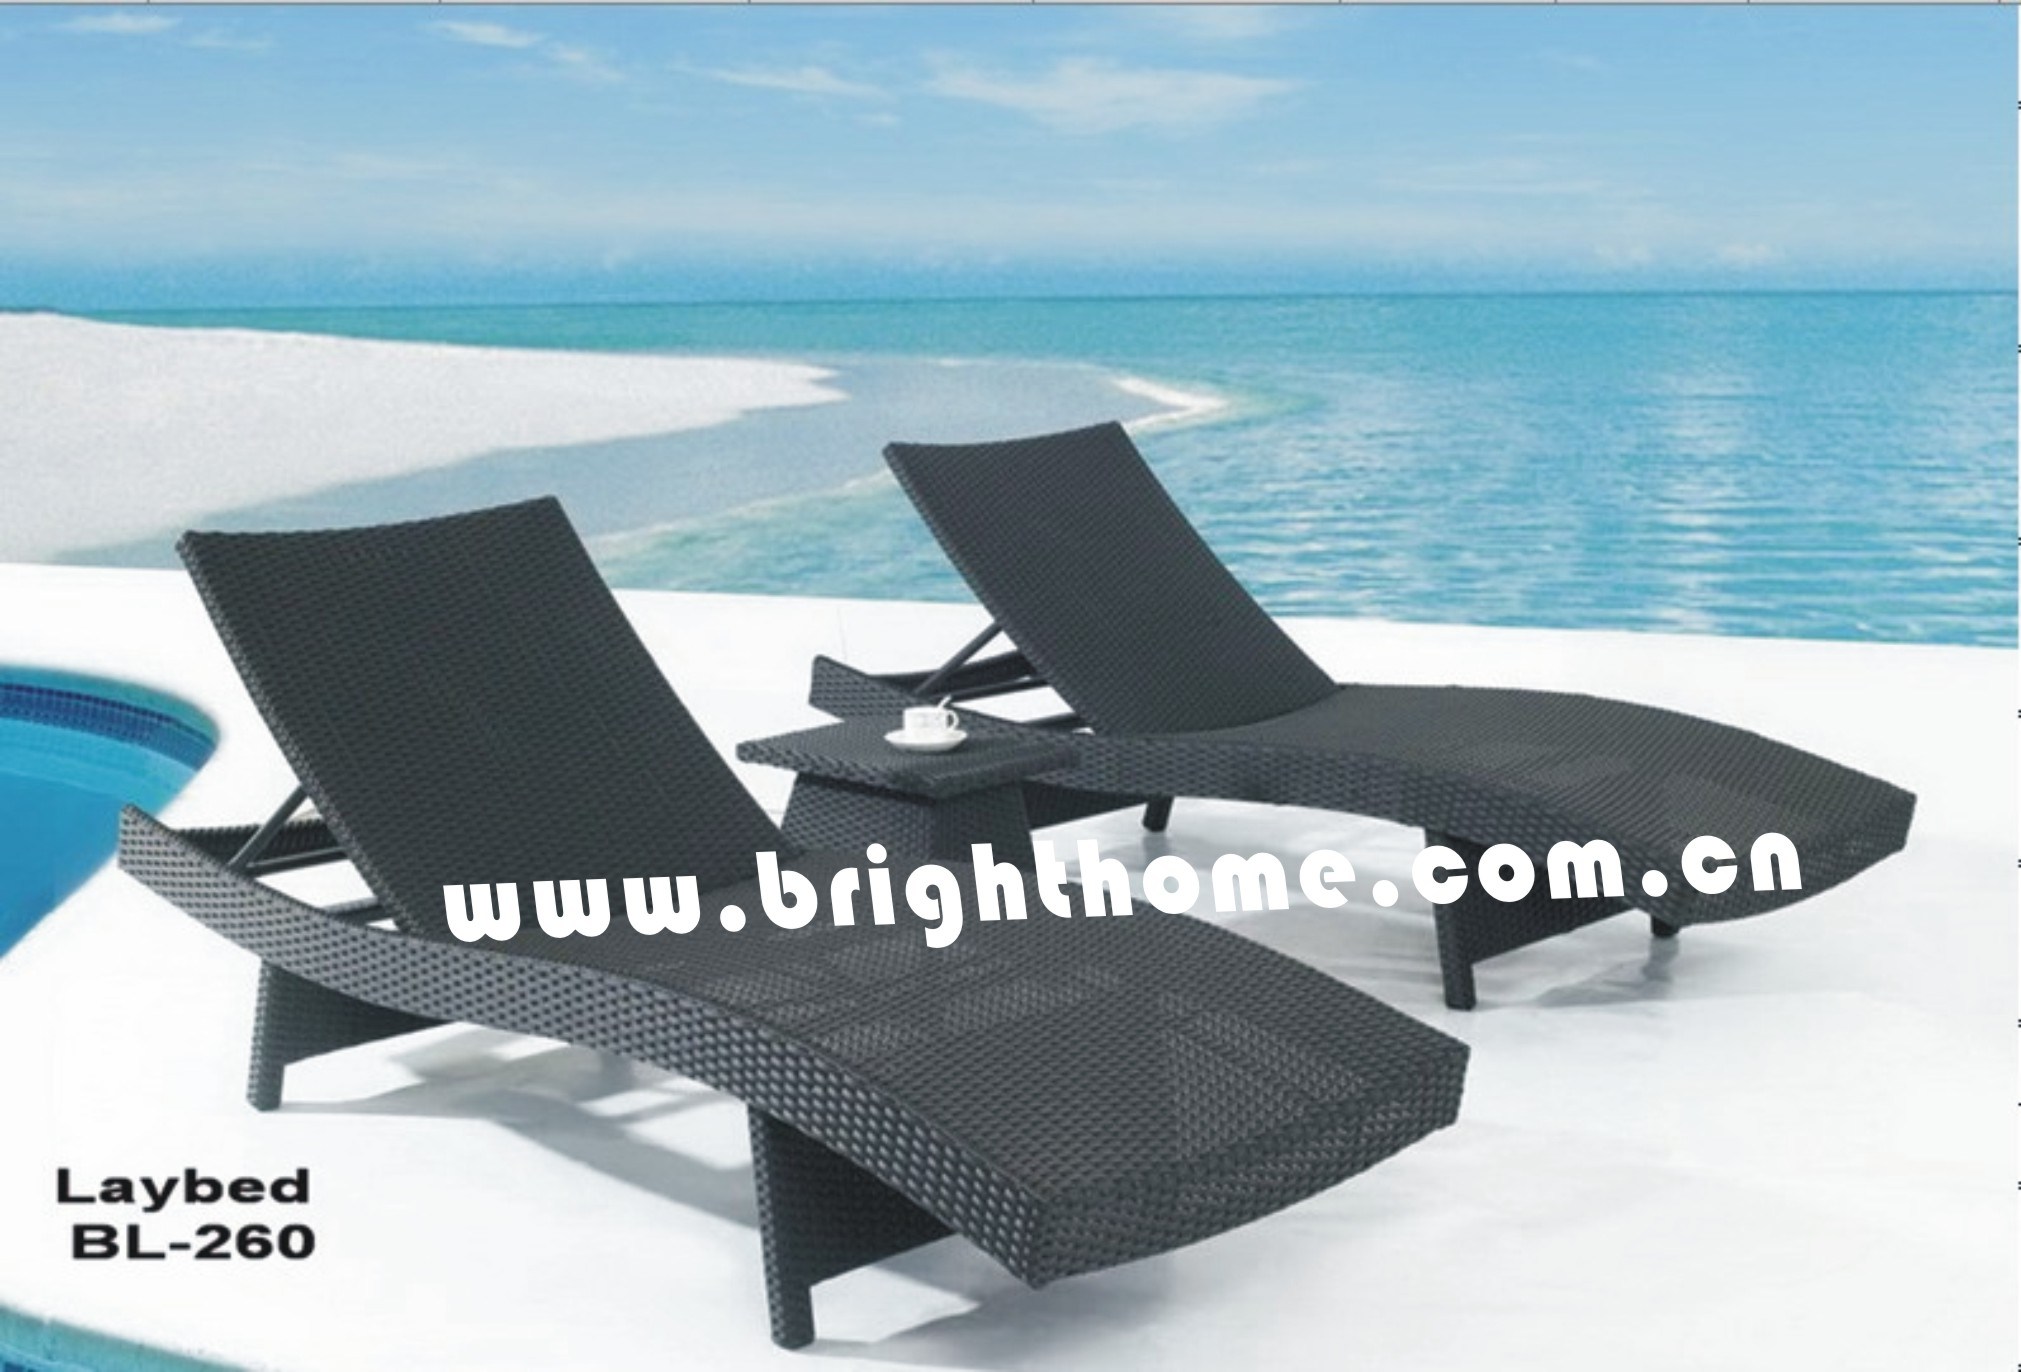 Day Bed / Laybed / Outdoor Lounge / Beach Bed / Beach Chair (BL-260)